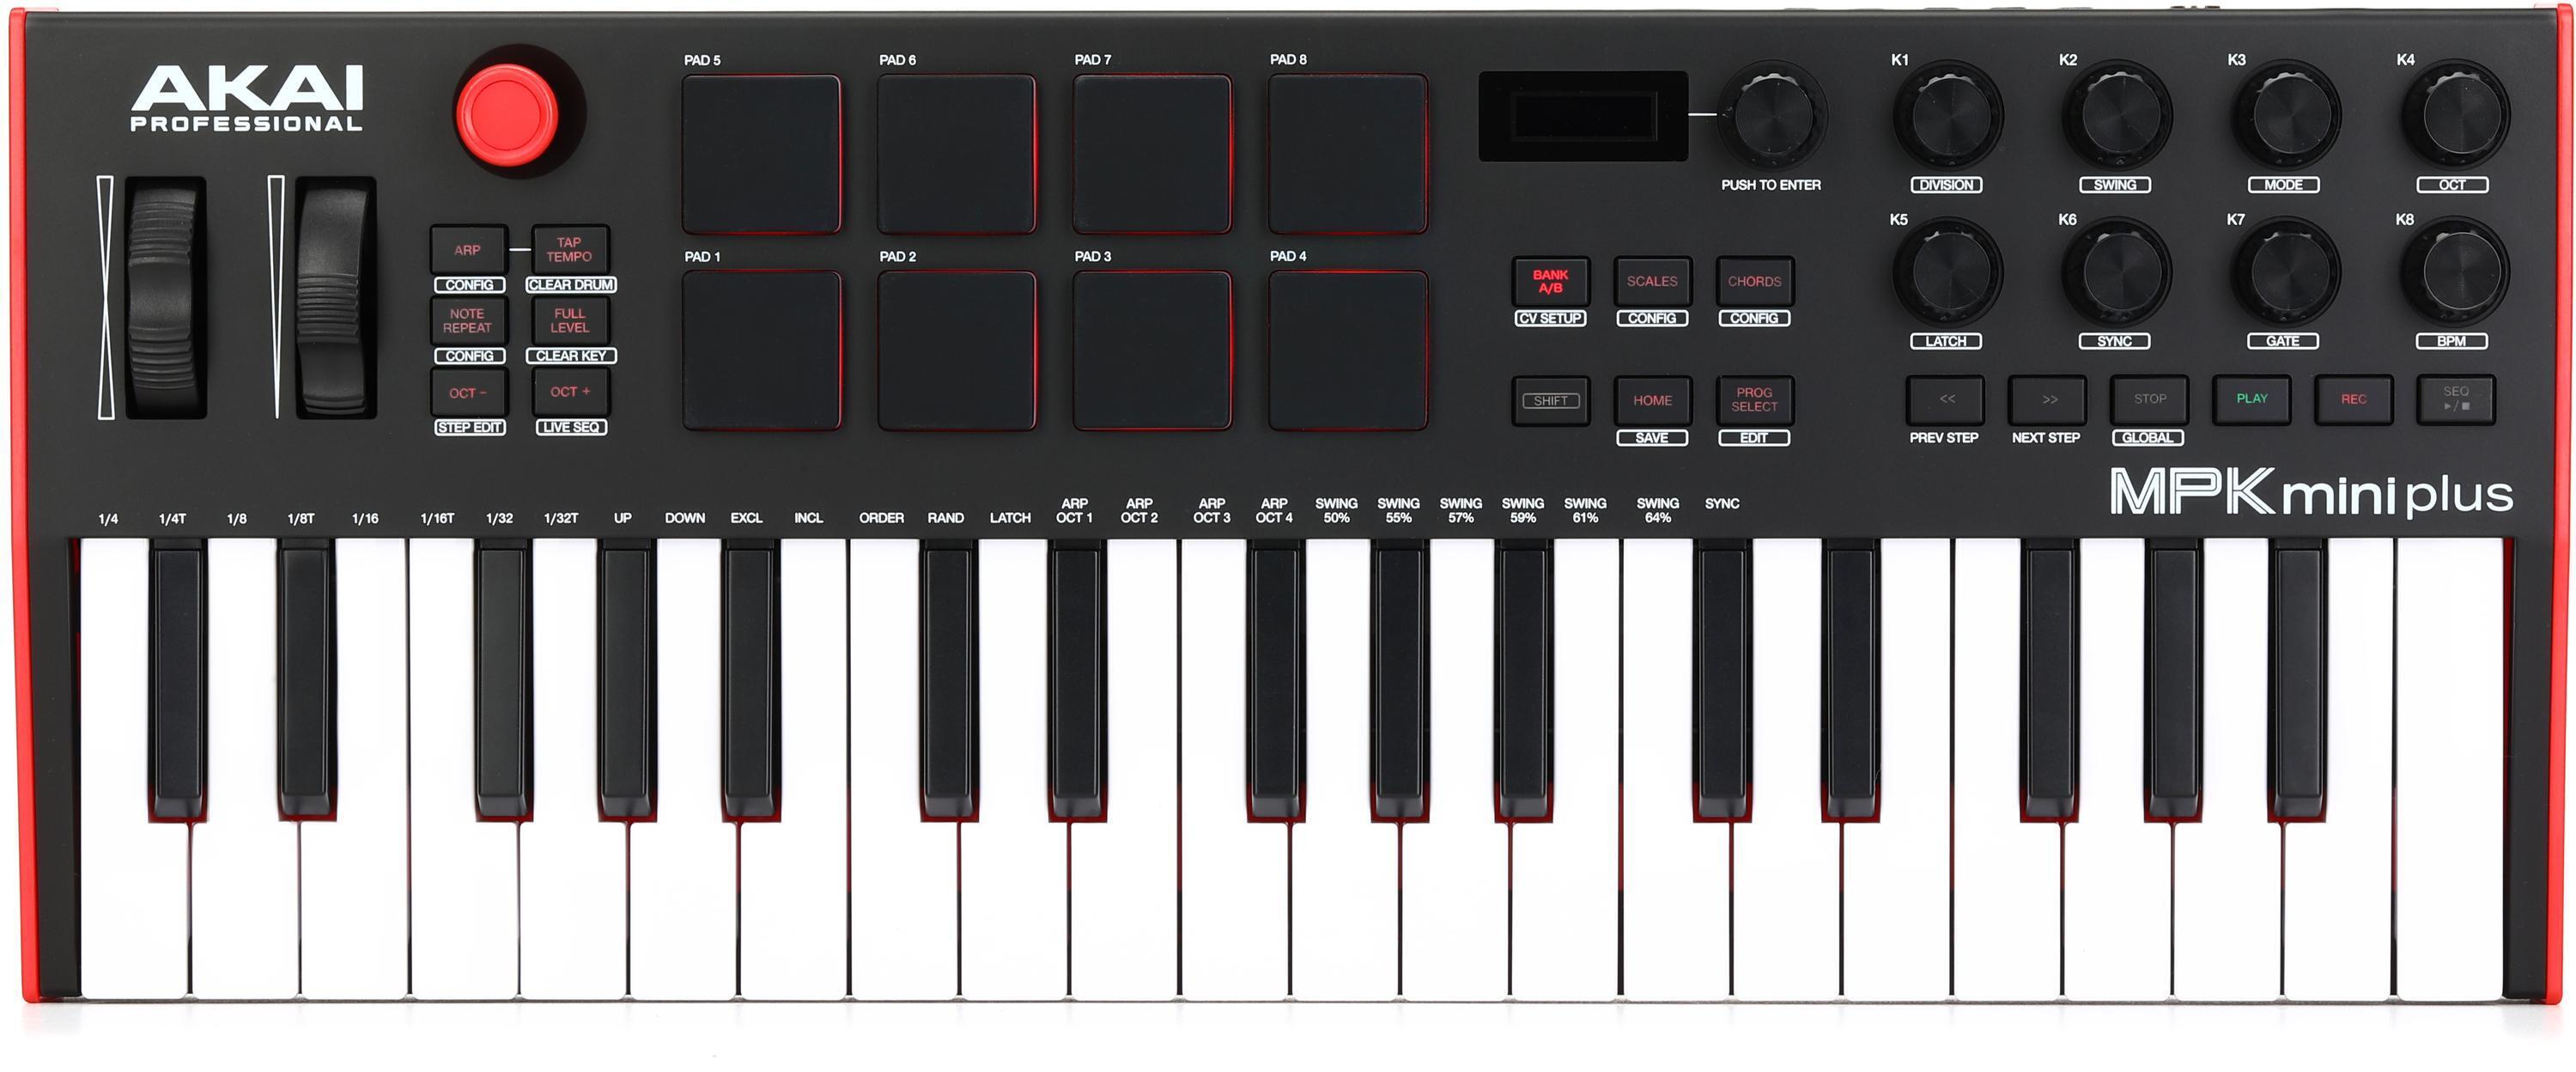 8 Best MIDI Controllers for Home Studios